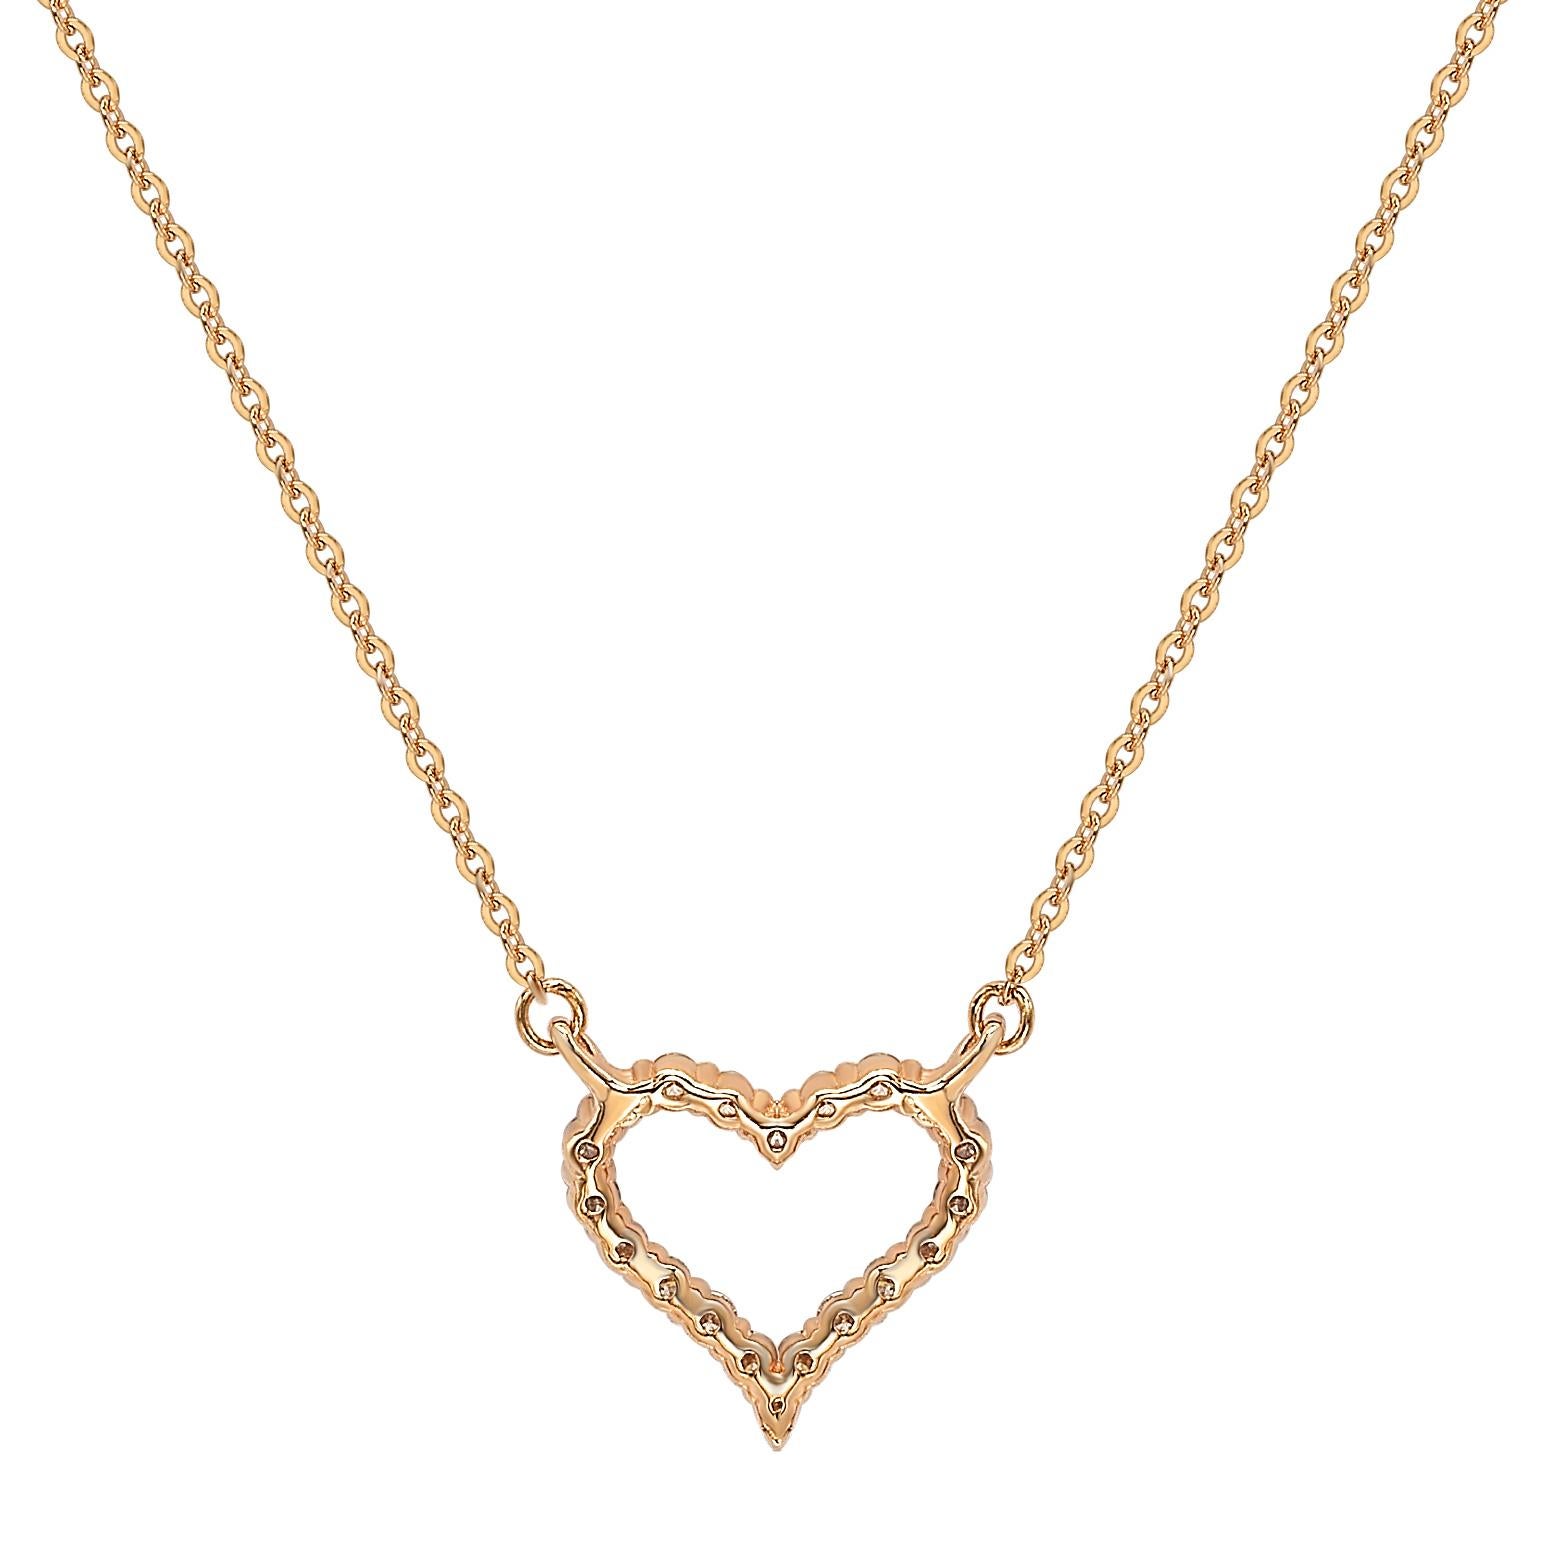 This breathtaking Suzy Levian heart necklace features natural diamonds, hand-set in 14-Karat white gold. It's the perfect gift to let someone special know you're thinking of them. Each heart necklace features a single row of pave natural white